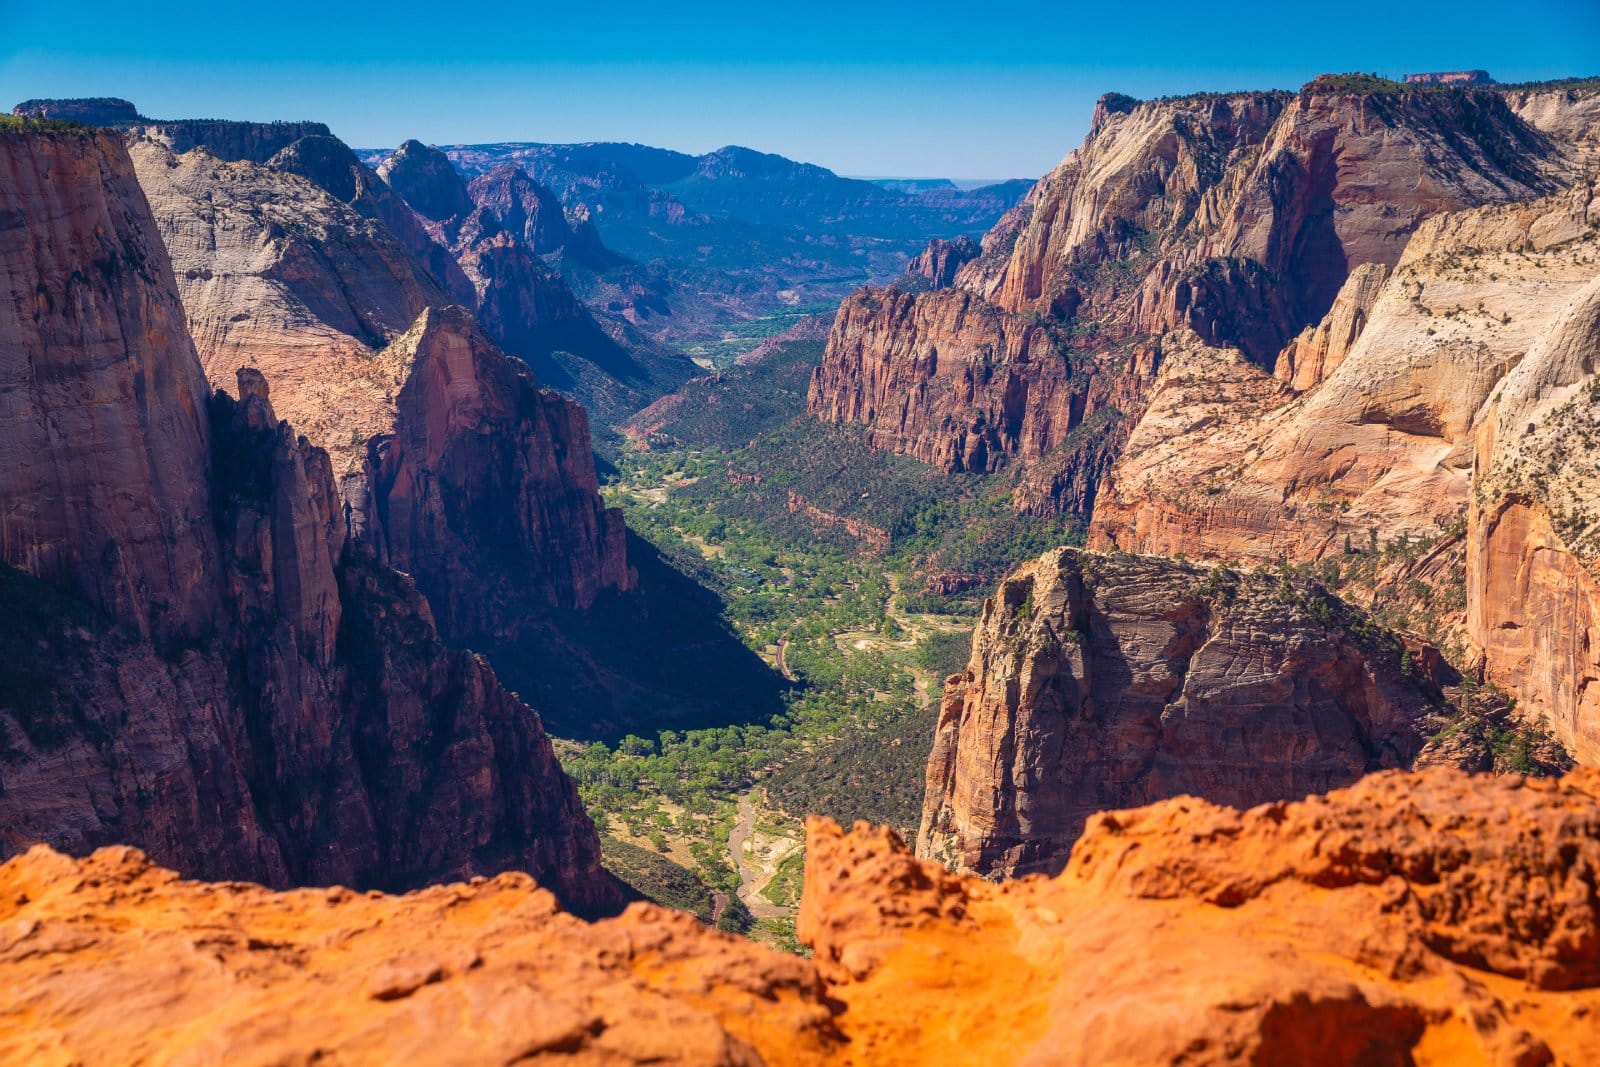 <p class="wp-caption-text">Image Credit: Shutterstock / VivL</p>  <p><span>Its national parks are well-loved, but Utah’s otherworldly landscapes extend beyond them, offering endless outdoor activities and natural beauty.</span></p>